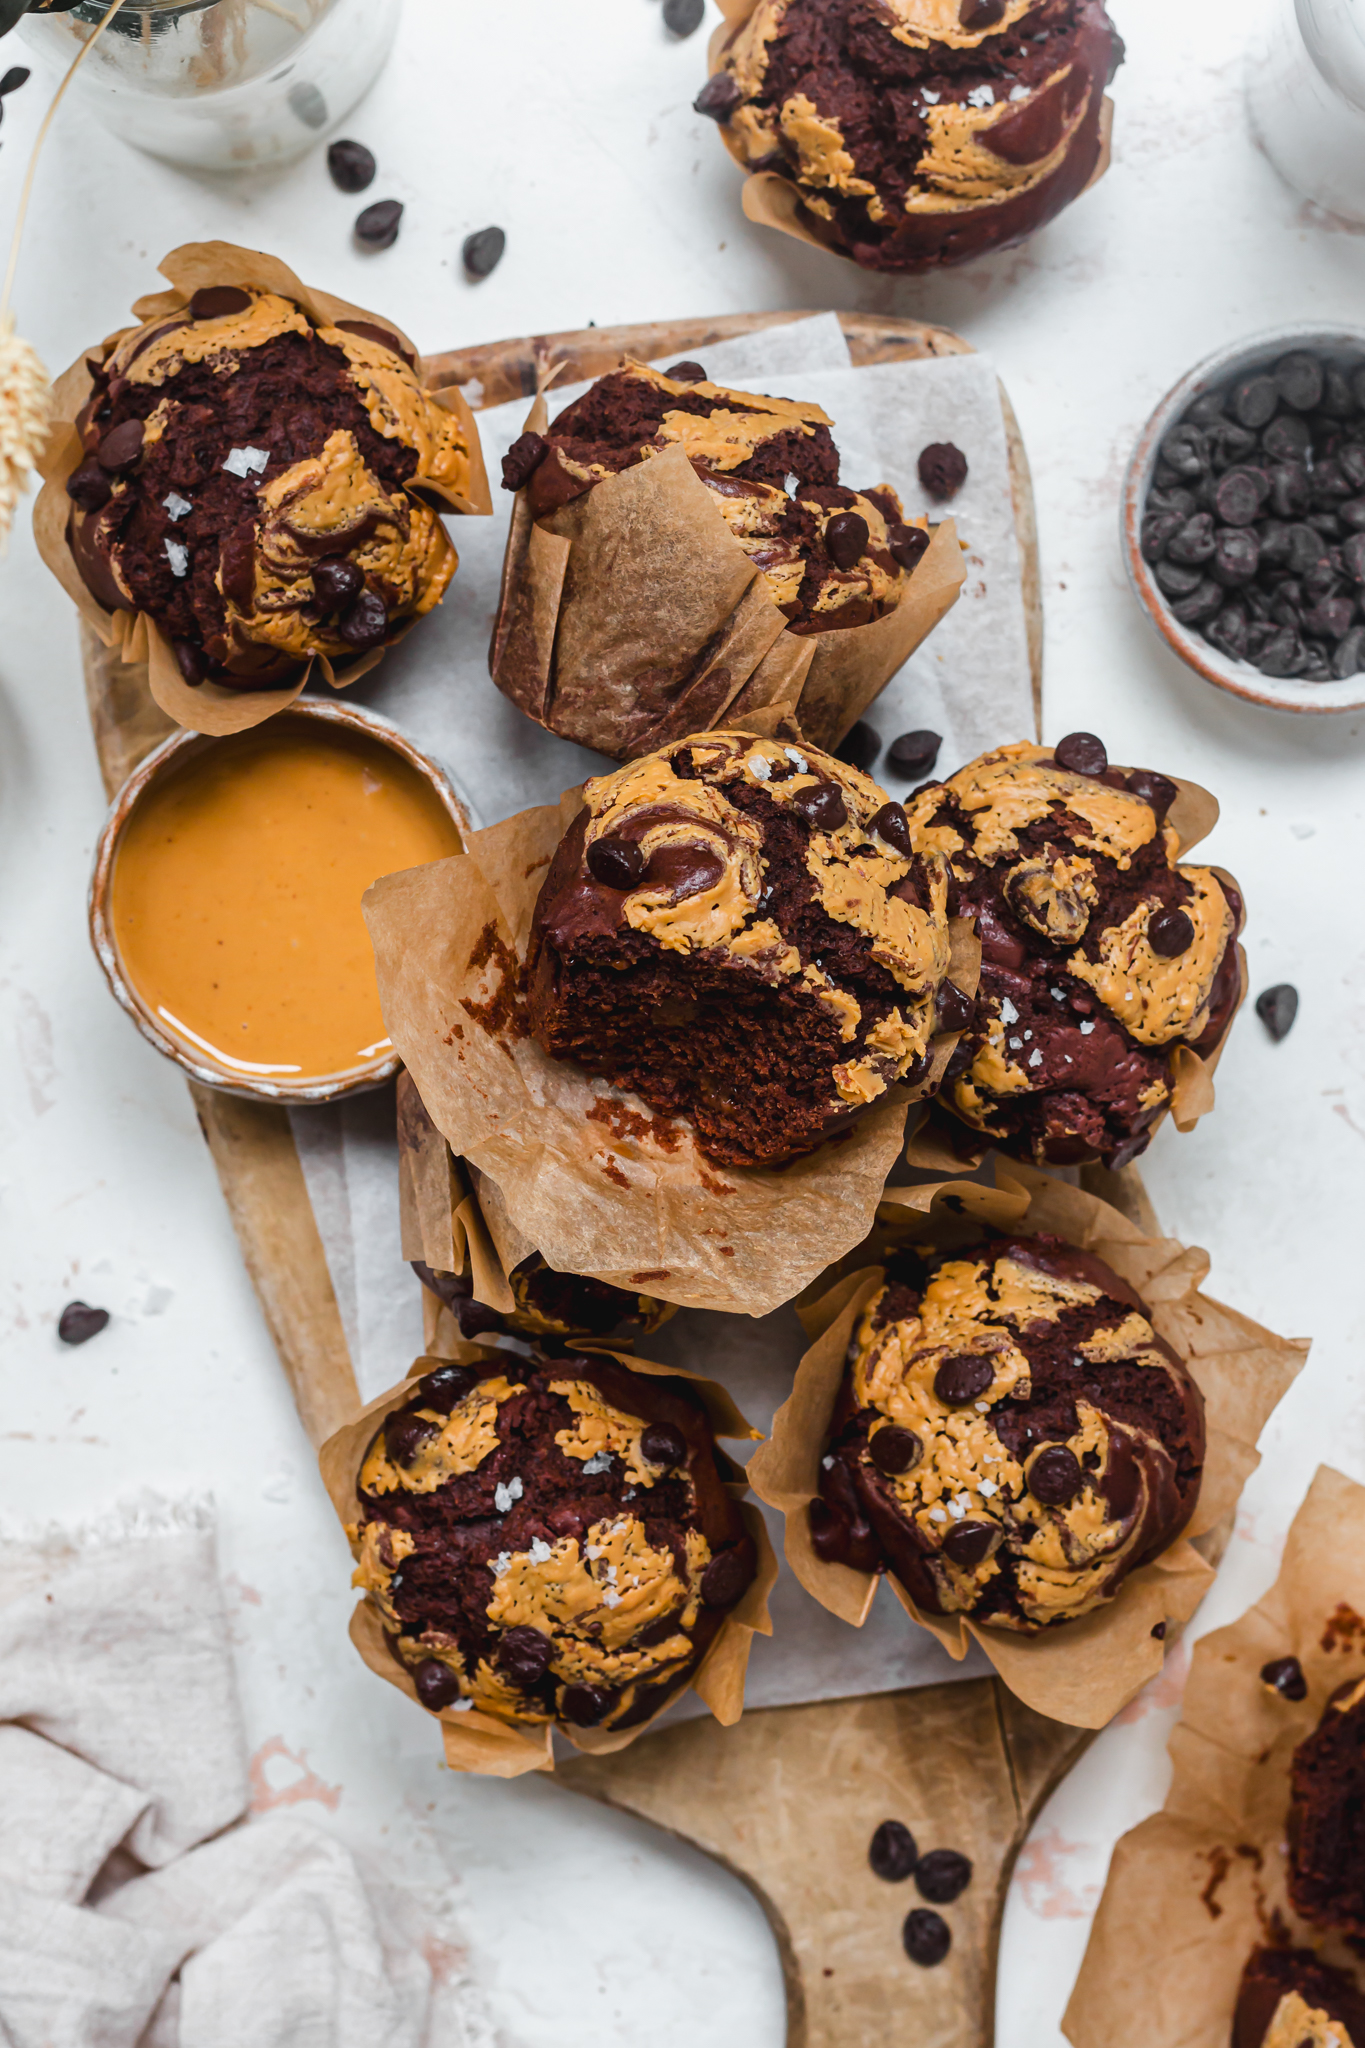 Some Bakery-Style Chocolate Peanut Butter Swirl Muffins with one bitten on a wooden board